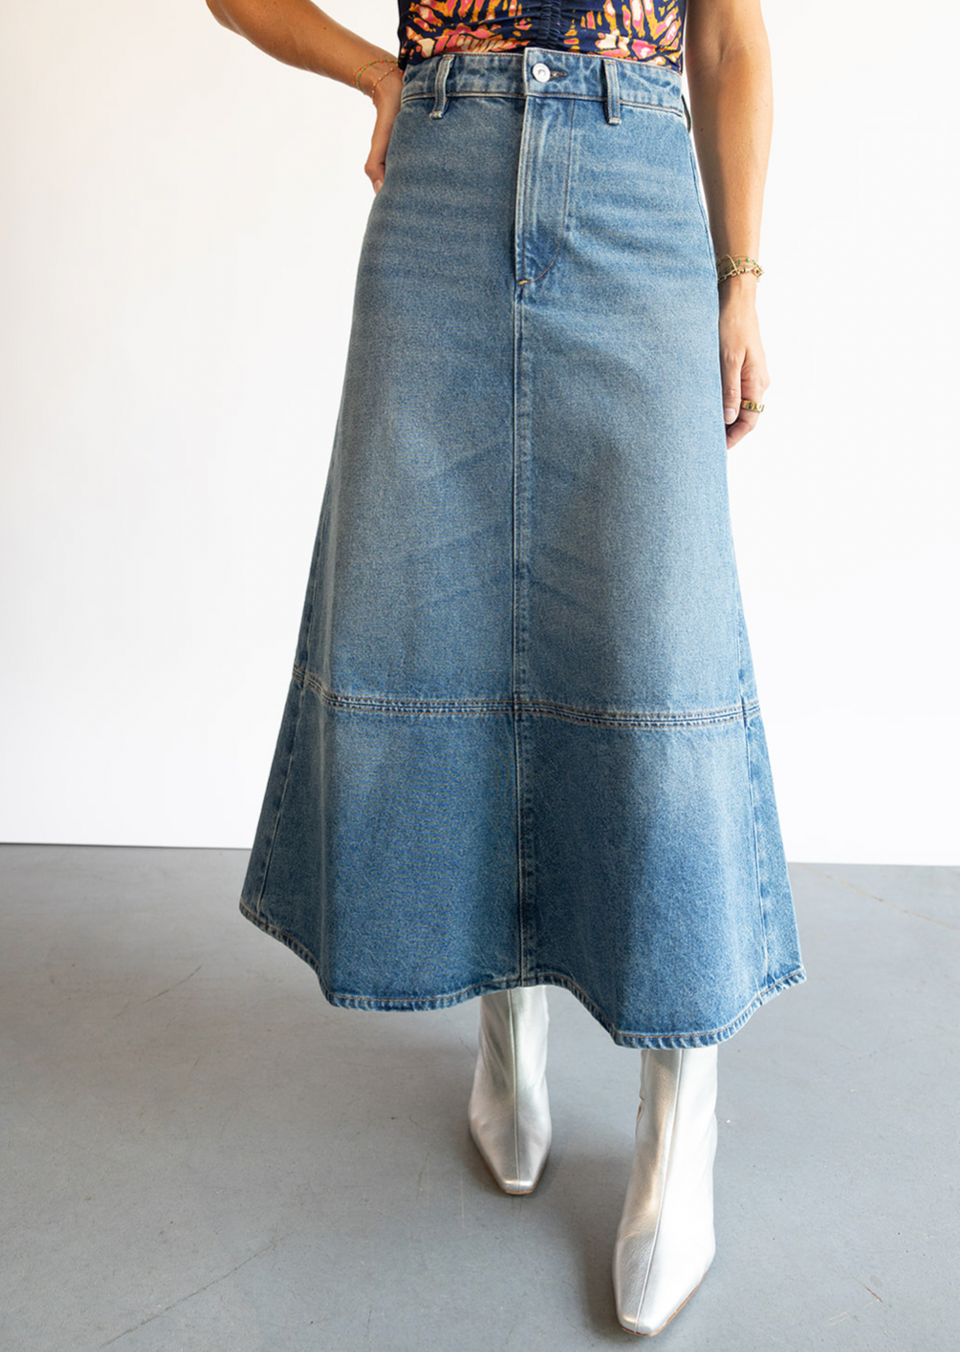 The Citizens of Humanity Cassia Denim Skirt